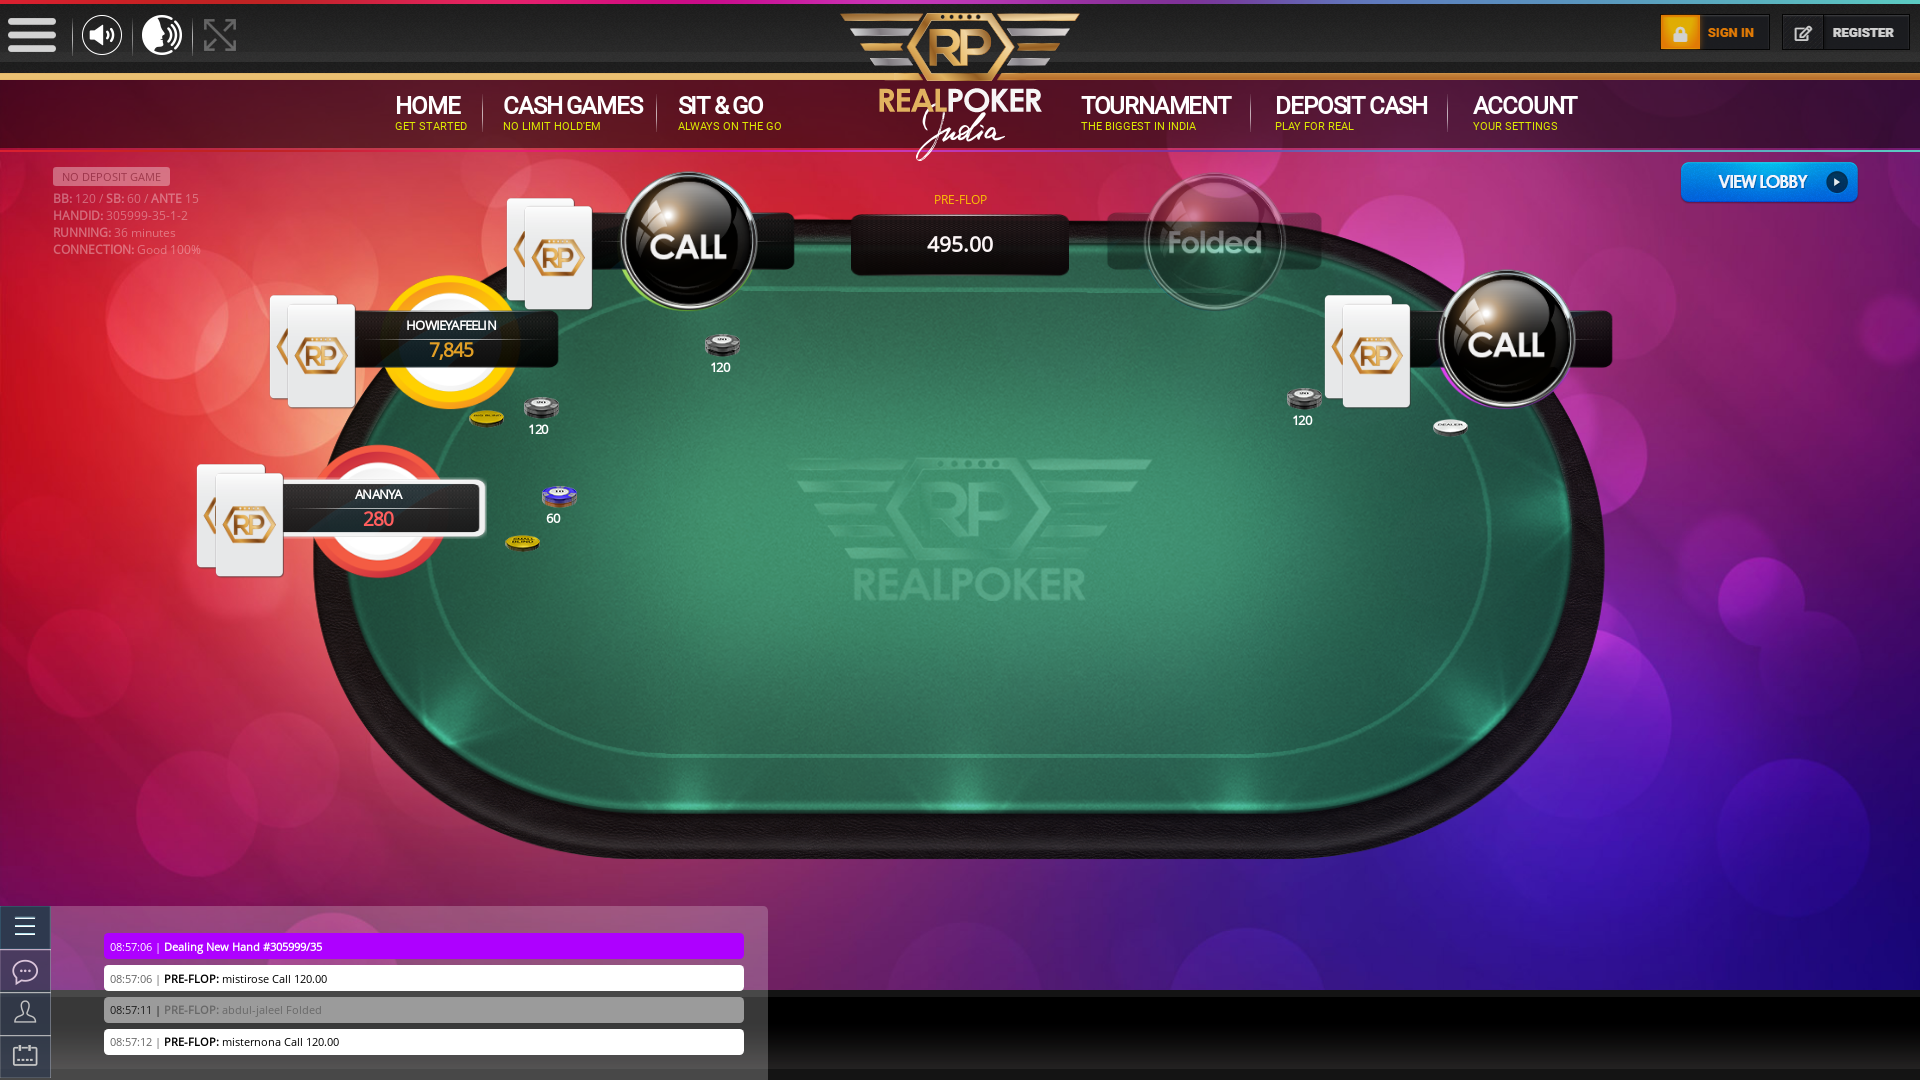 Real poker 10 player table in the 36th minute of the match